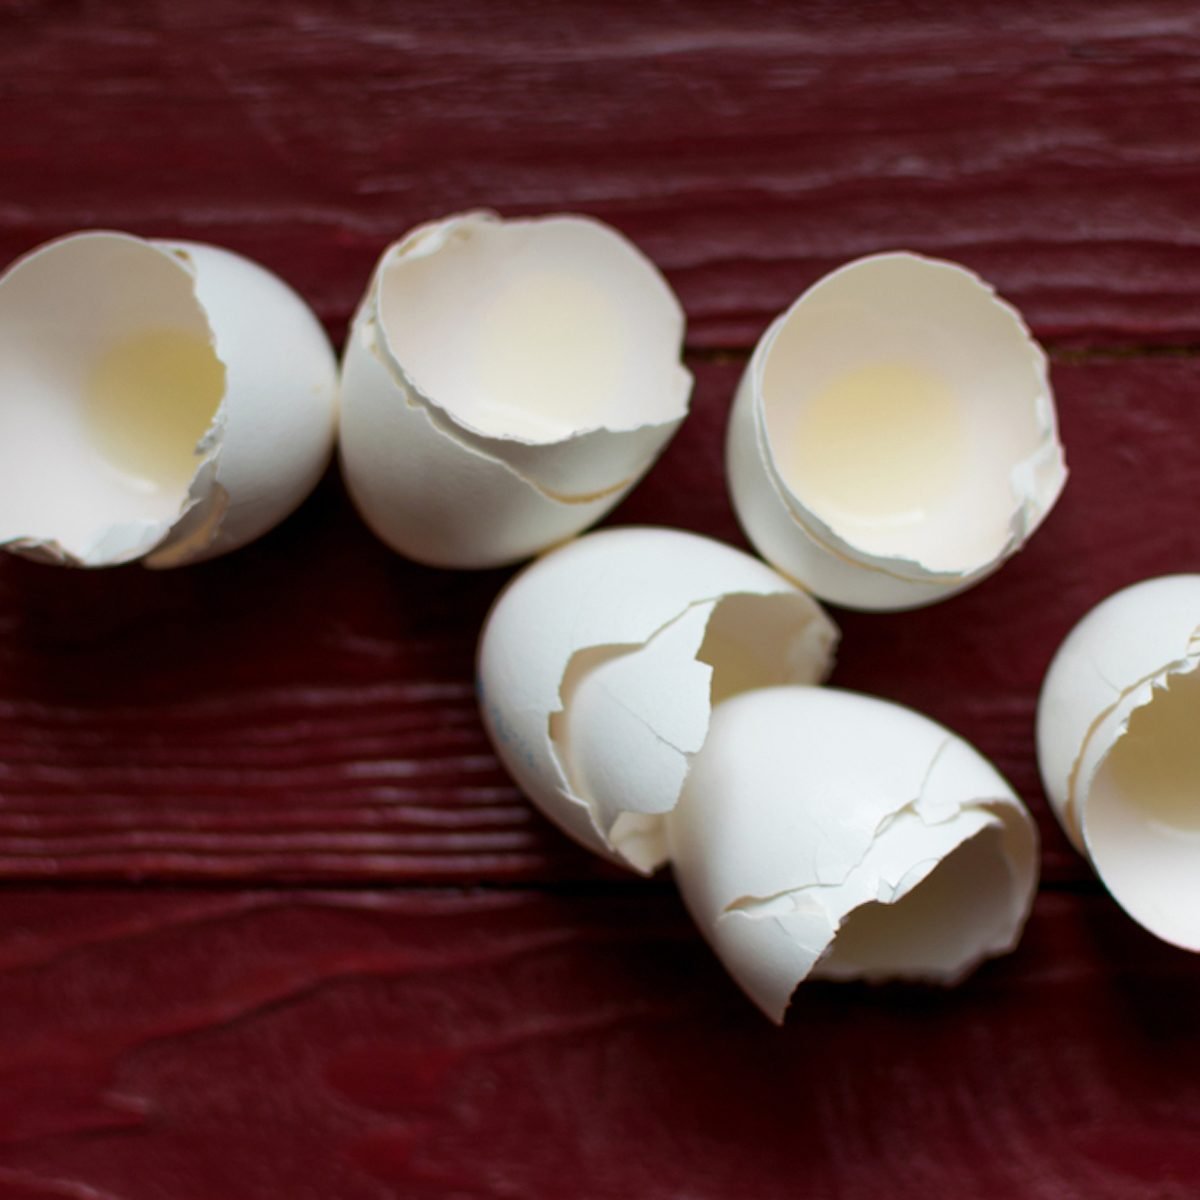 15 Reasons Why You Need To Stop Throwing Away Your Eggshells